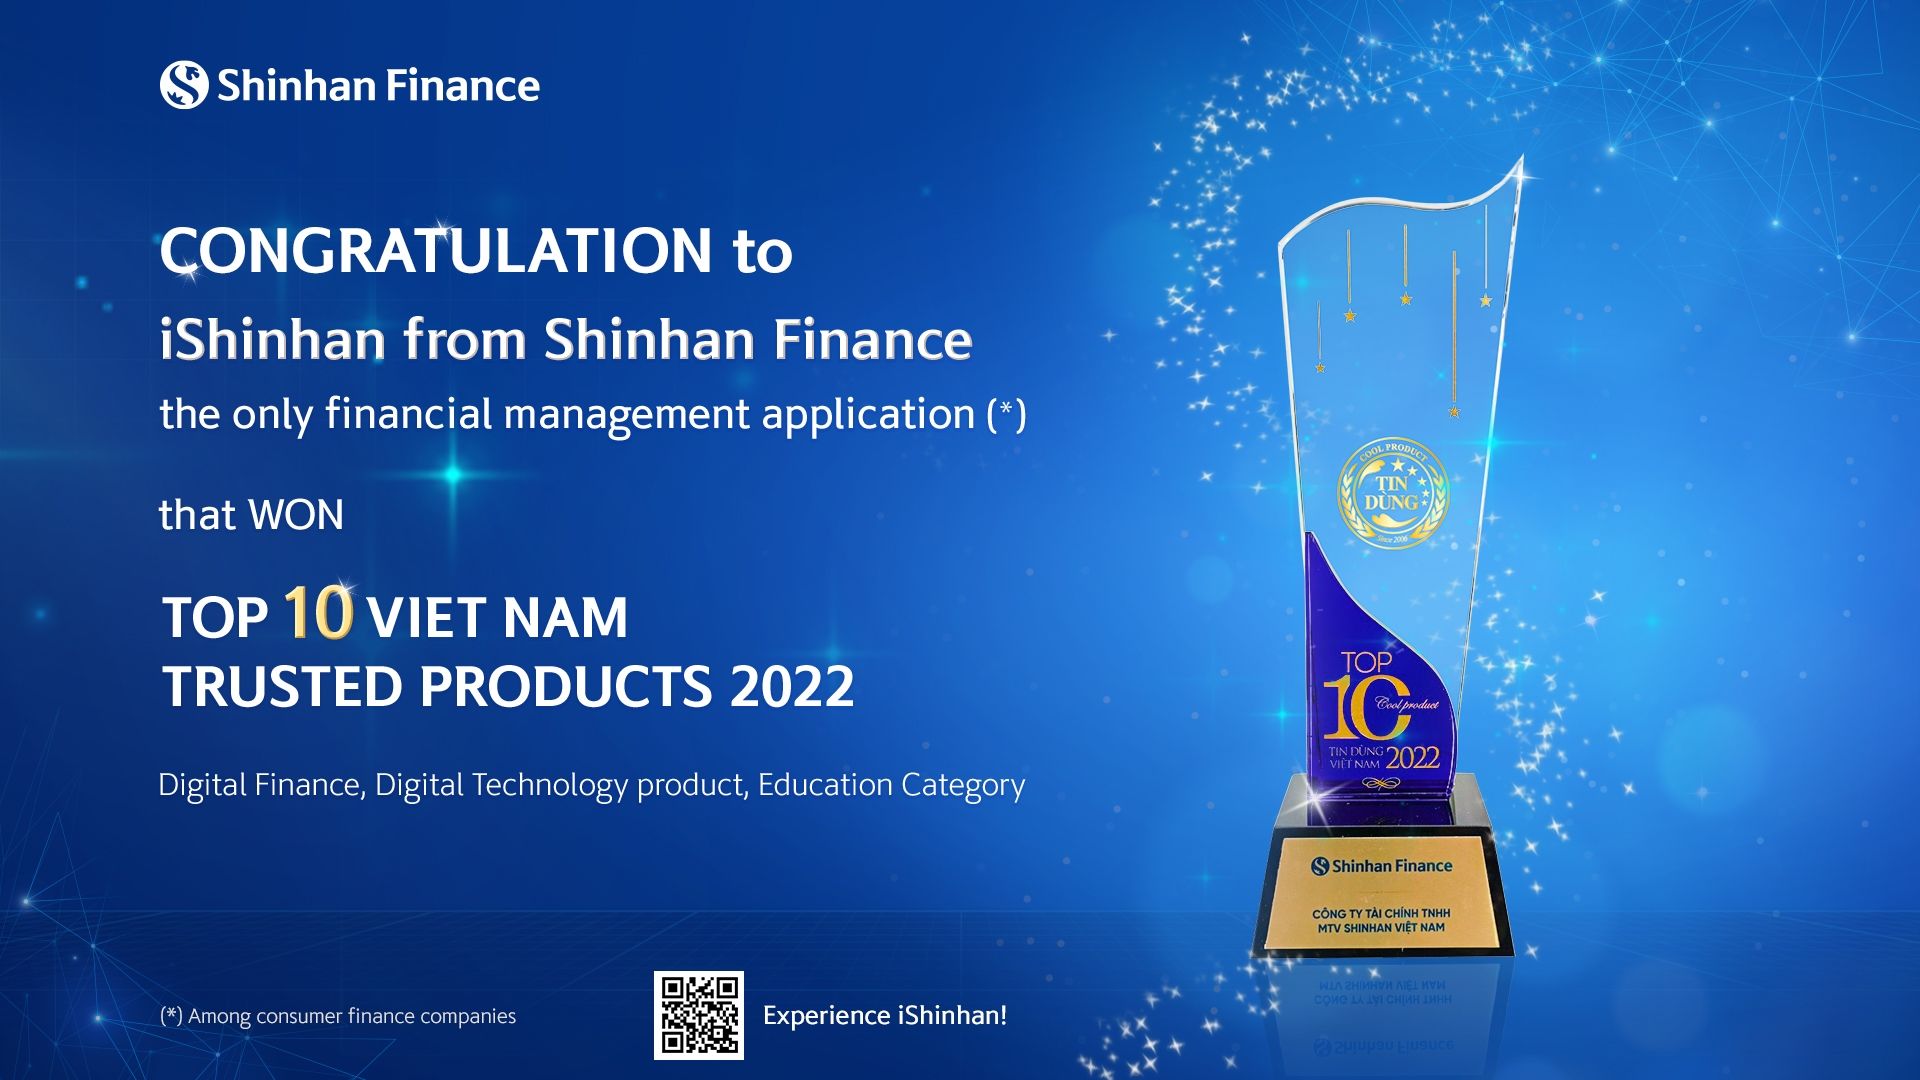 Top 10 Vietnam Trusted Products 2022